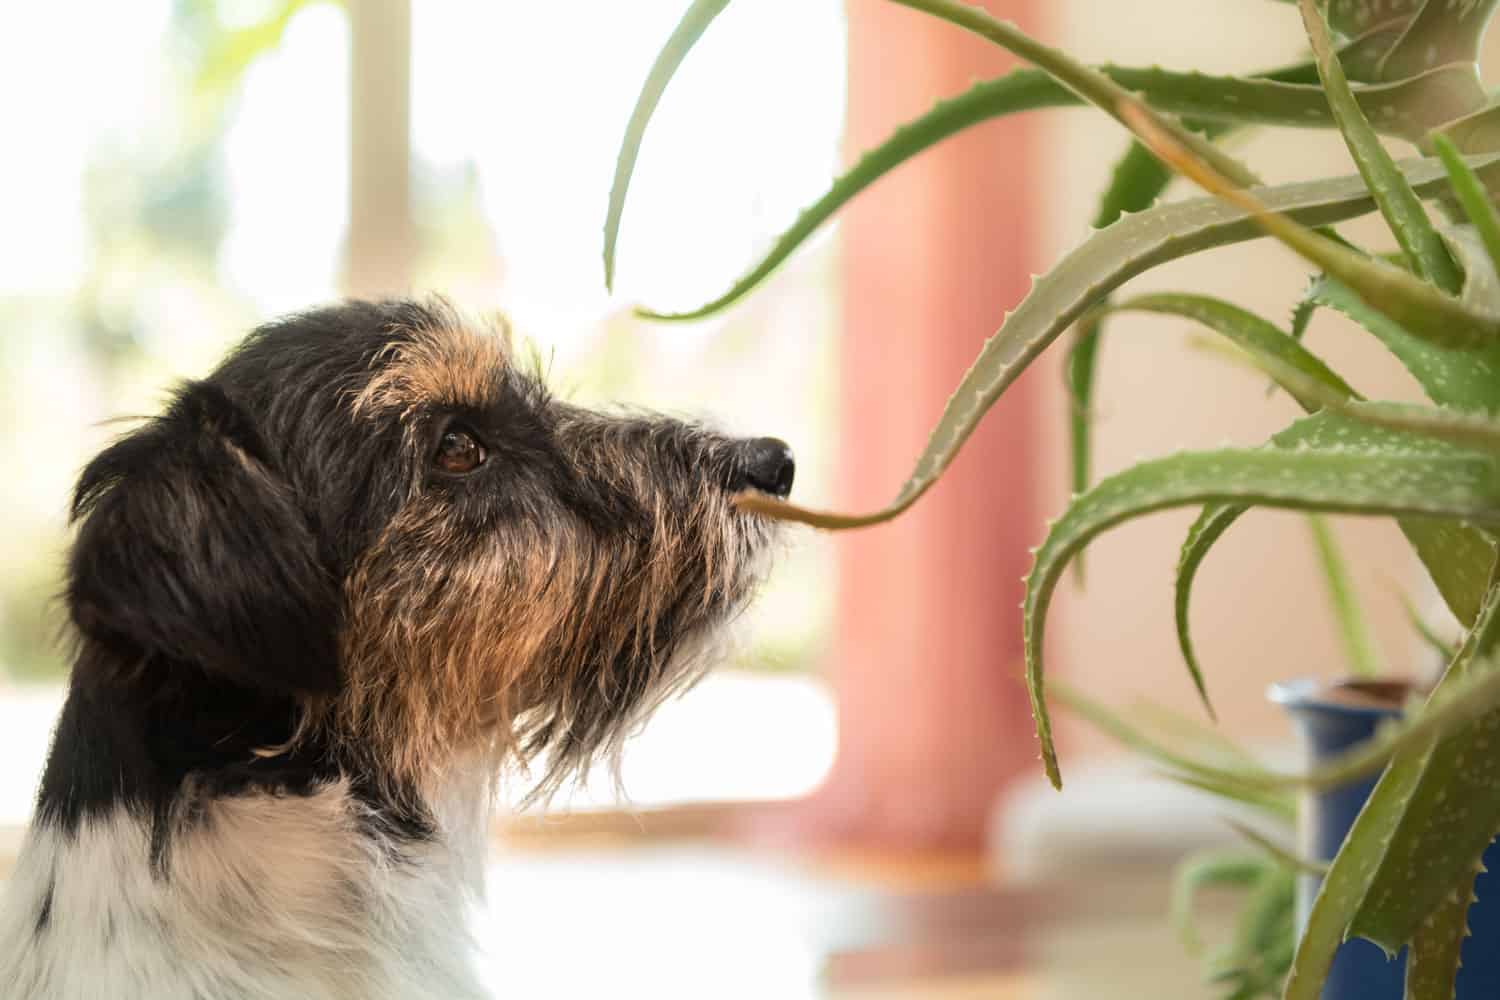 Cute dog sniffing an aloe vera plant